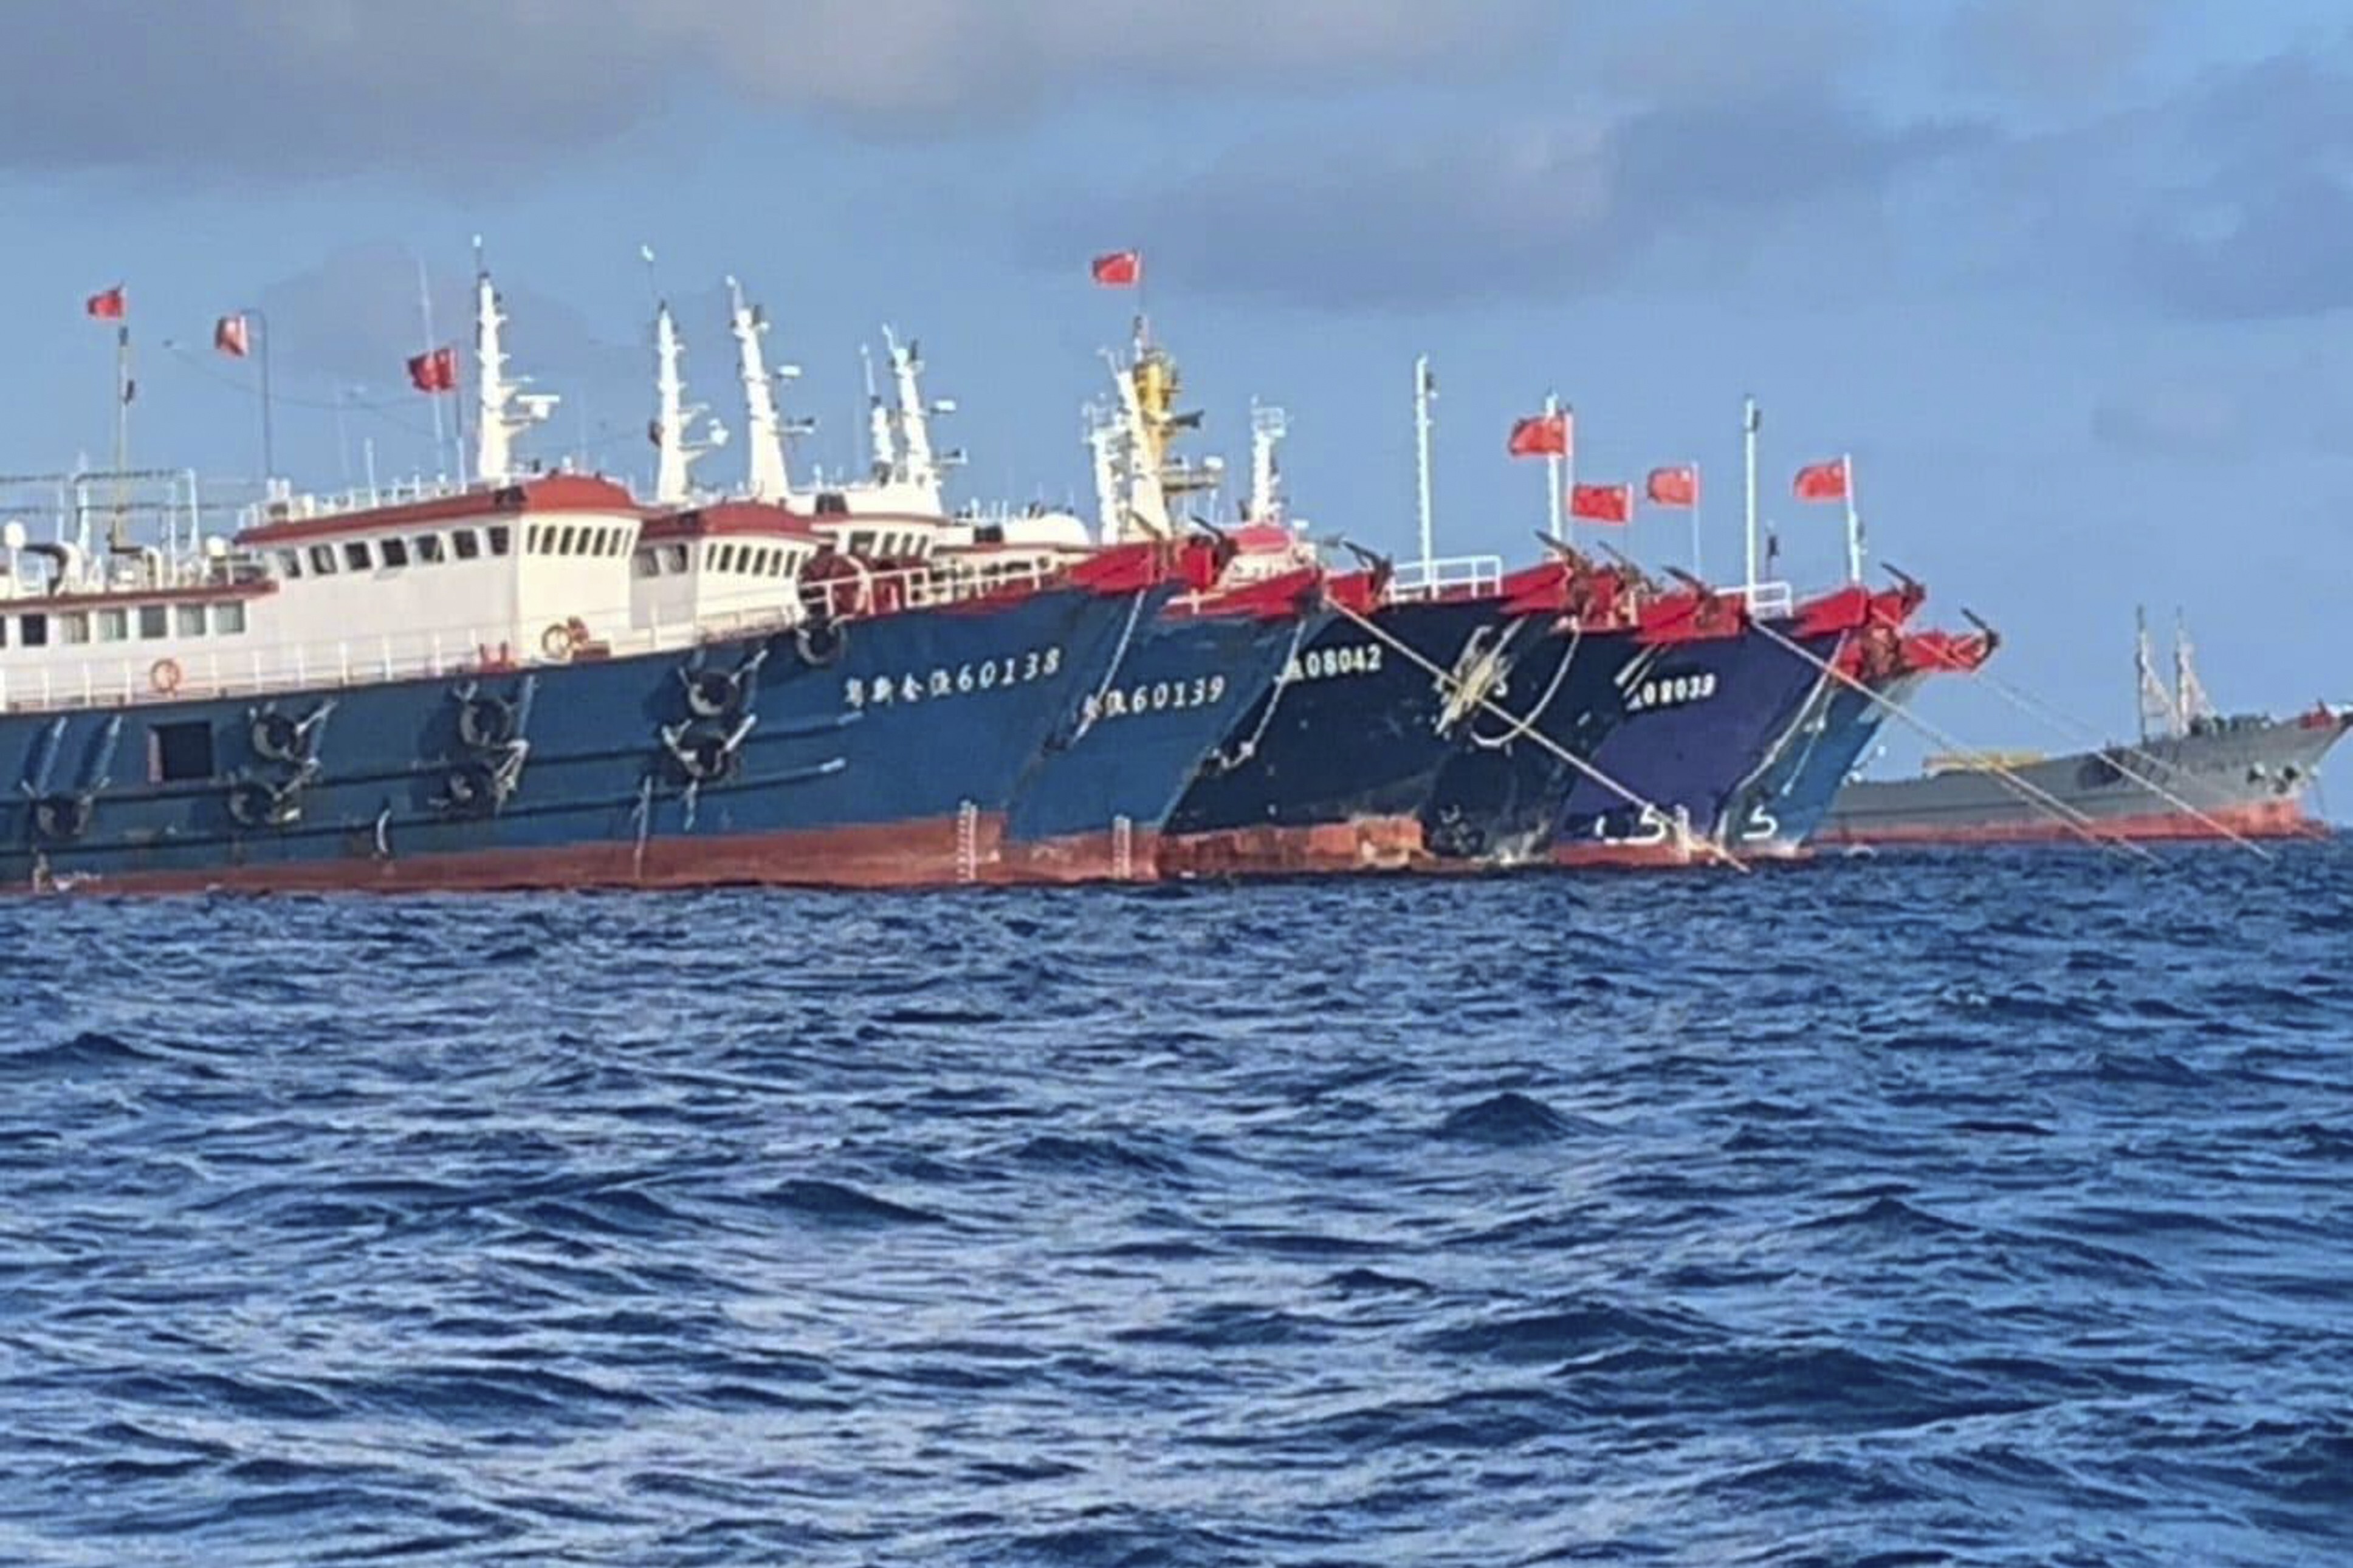 Chinese vessels moored at Whitsun Reef in March. Photo: AP